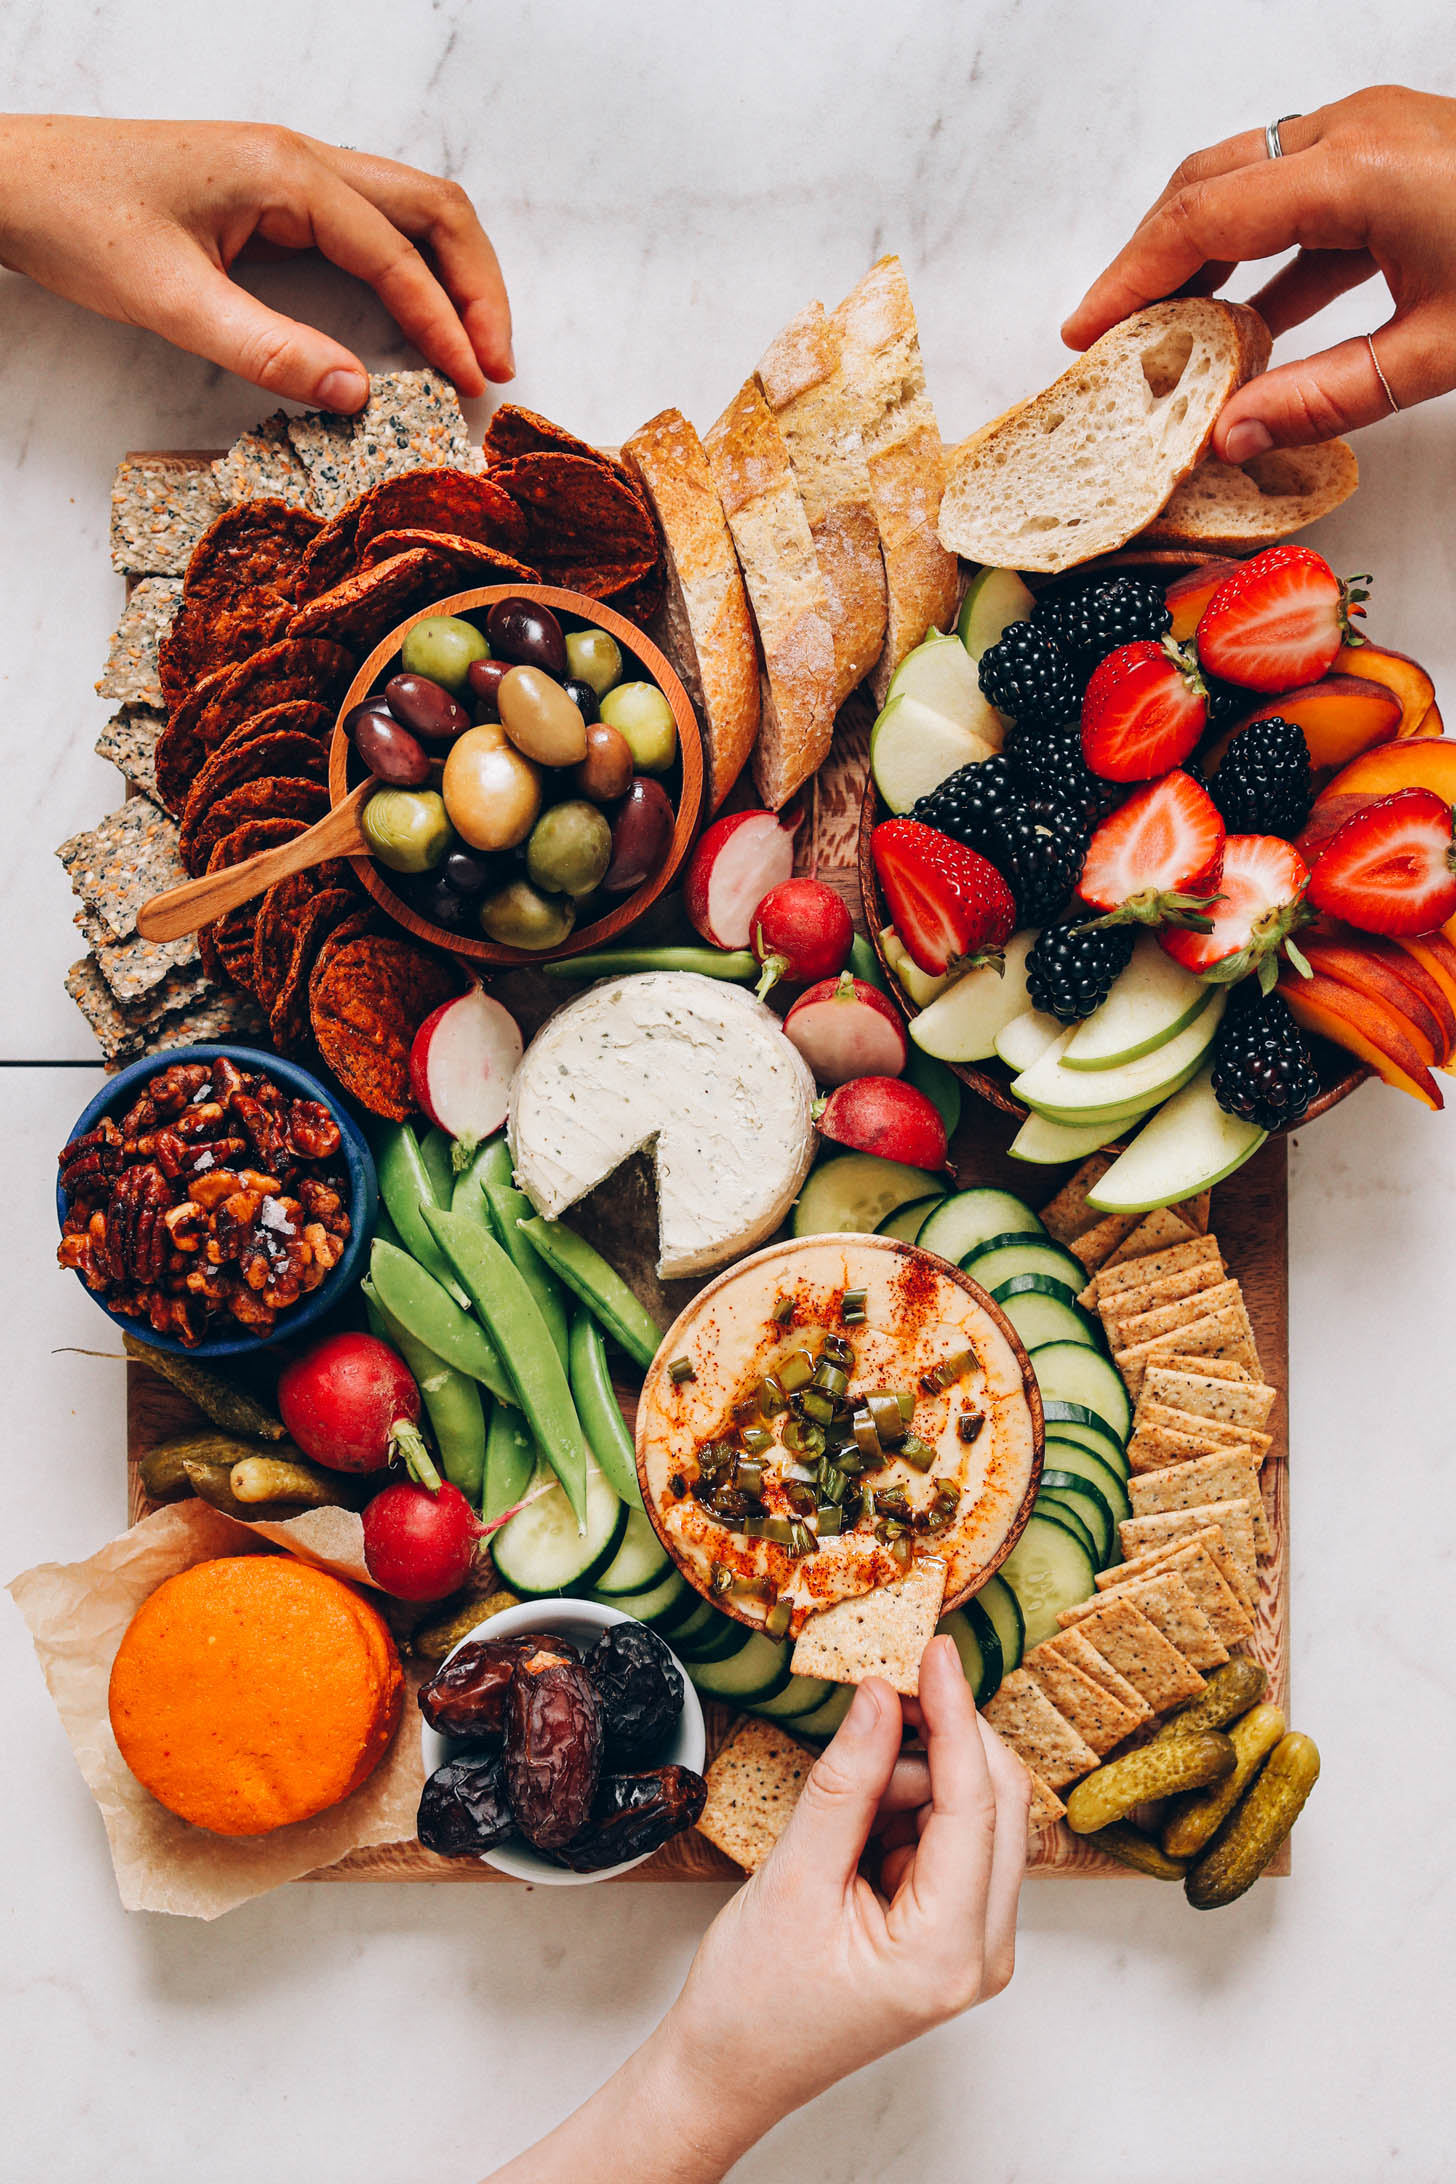 Hands grabbing snacks from a vegan charcuterie board